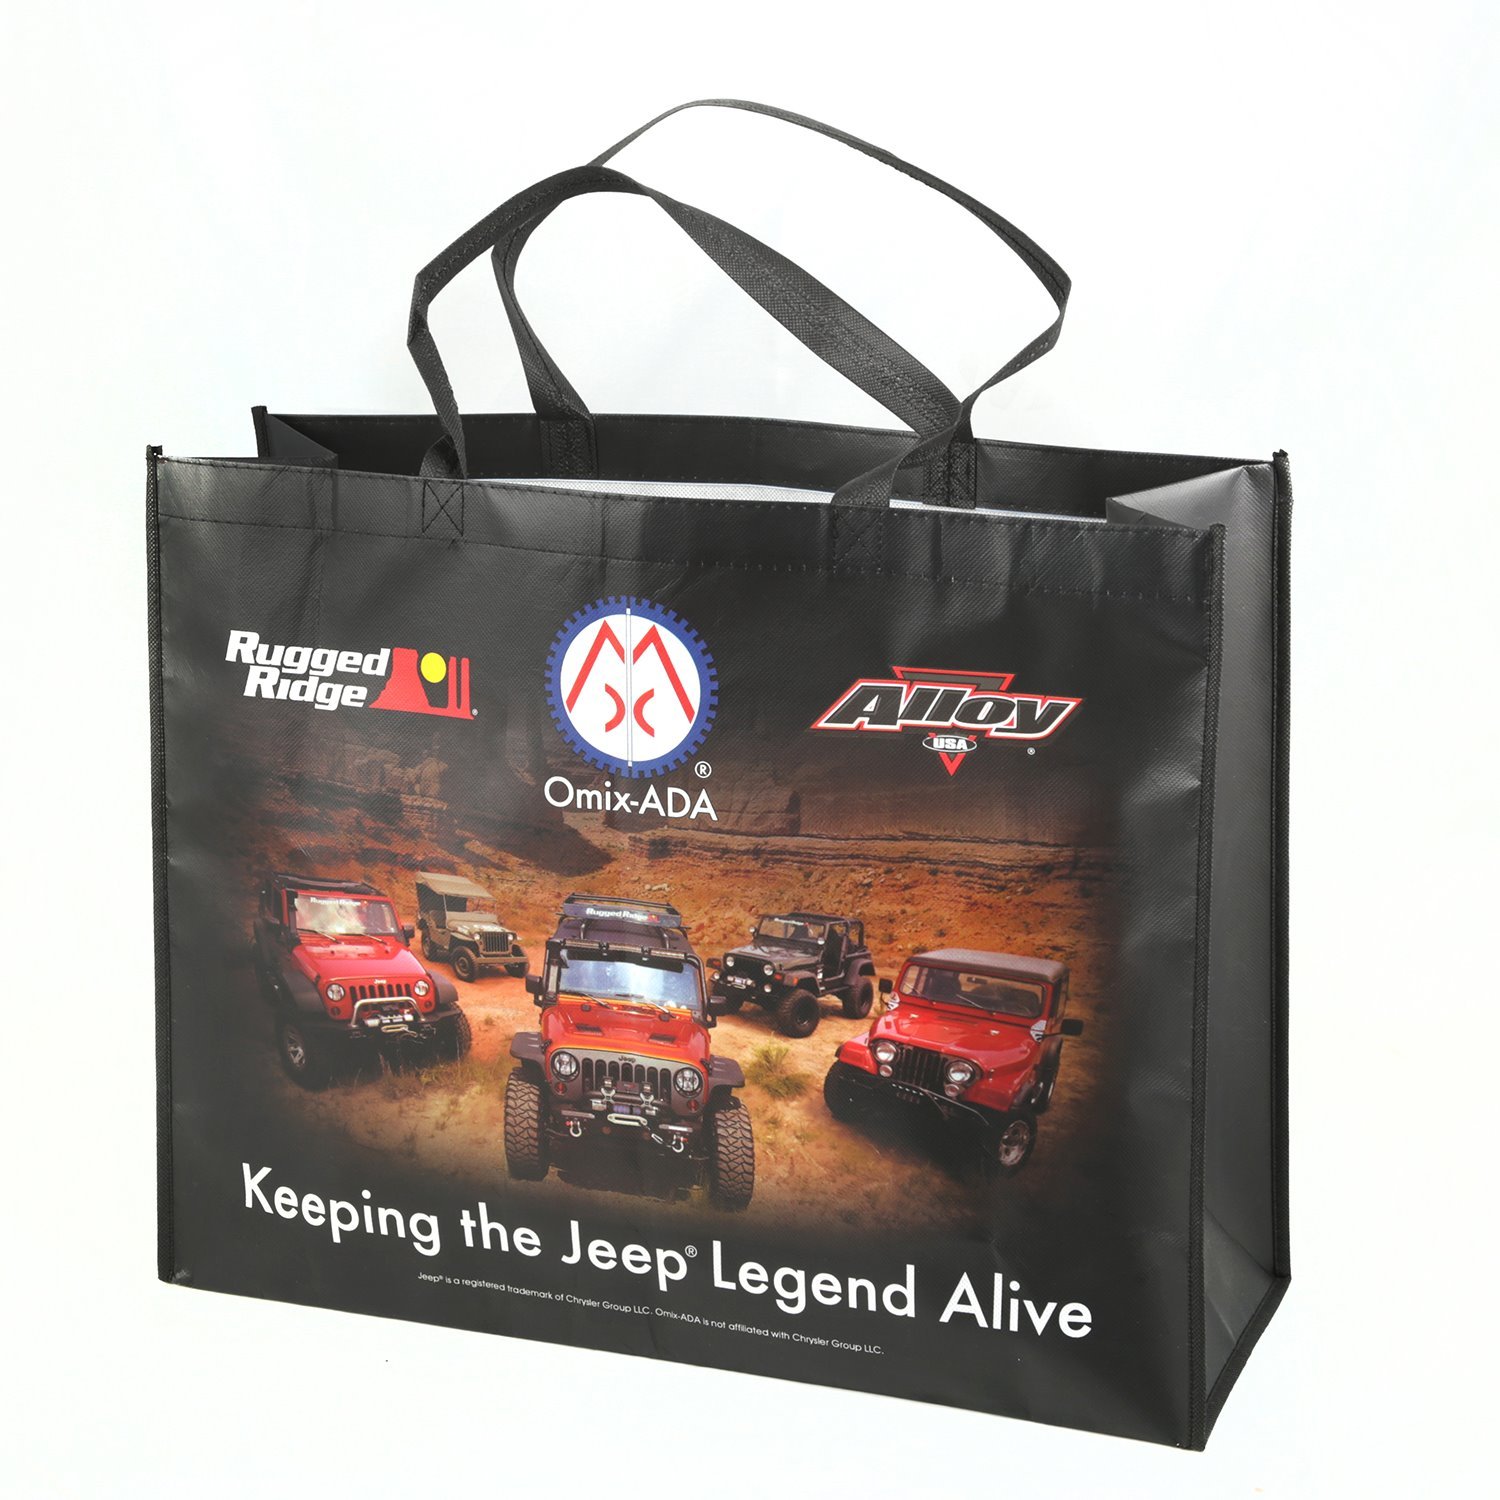 This promotional tote bag from Omix-ADA states Keeping the Jeep Legend Alive